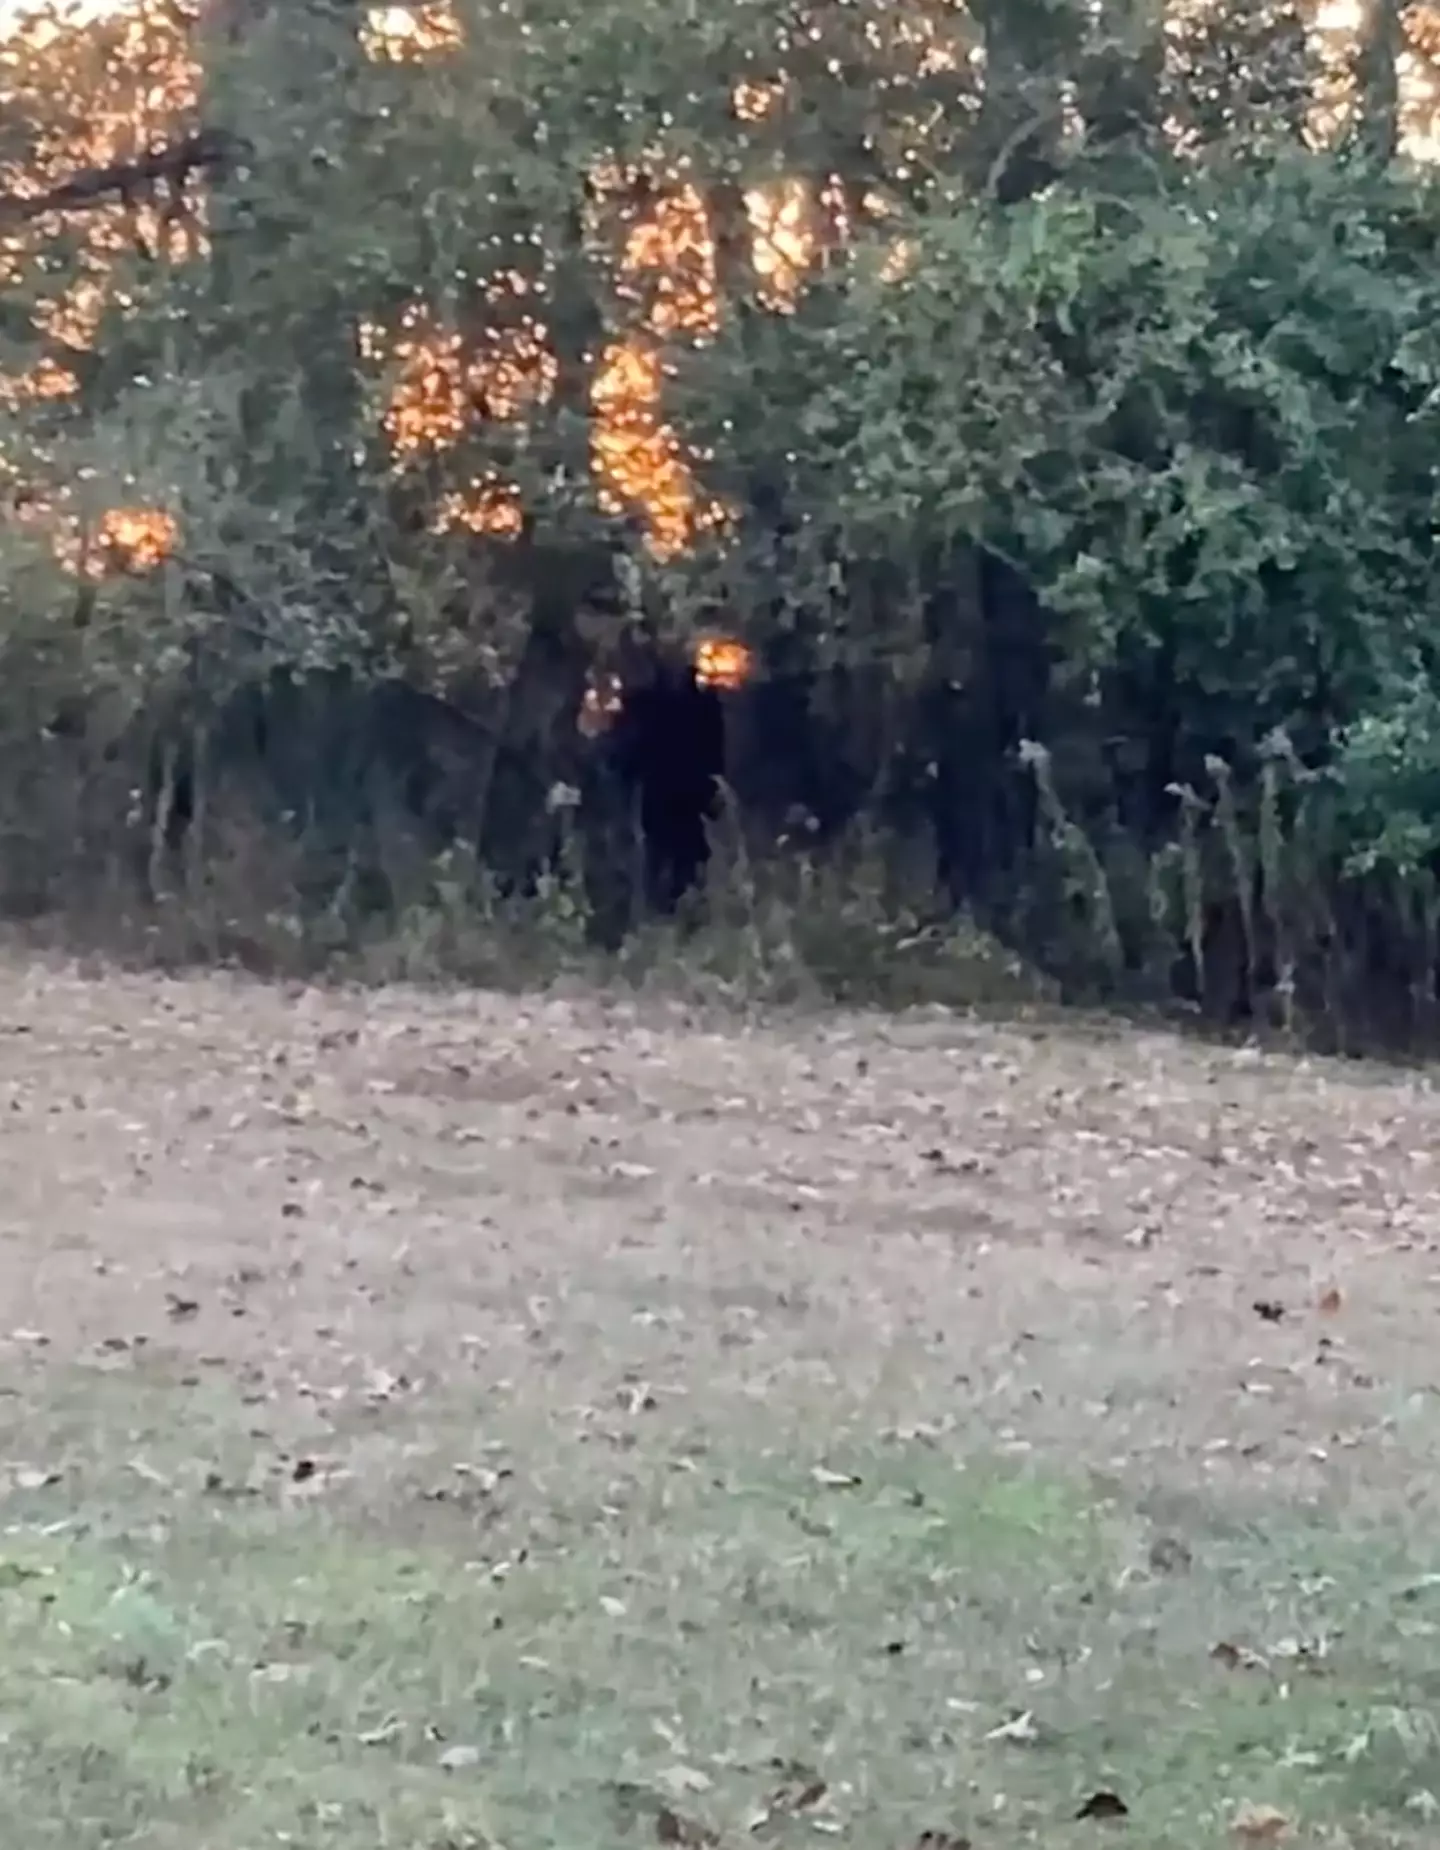 The footage shows a large black figure.